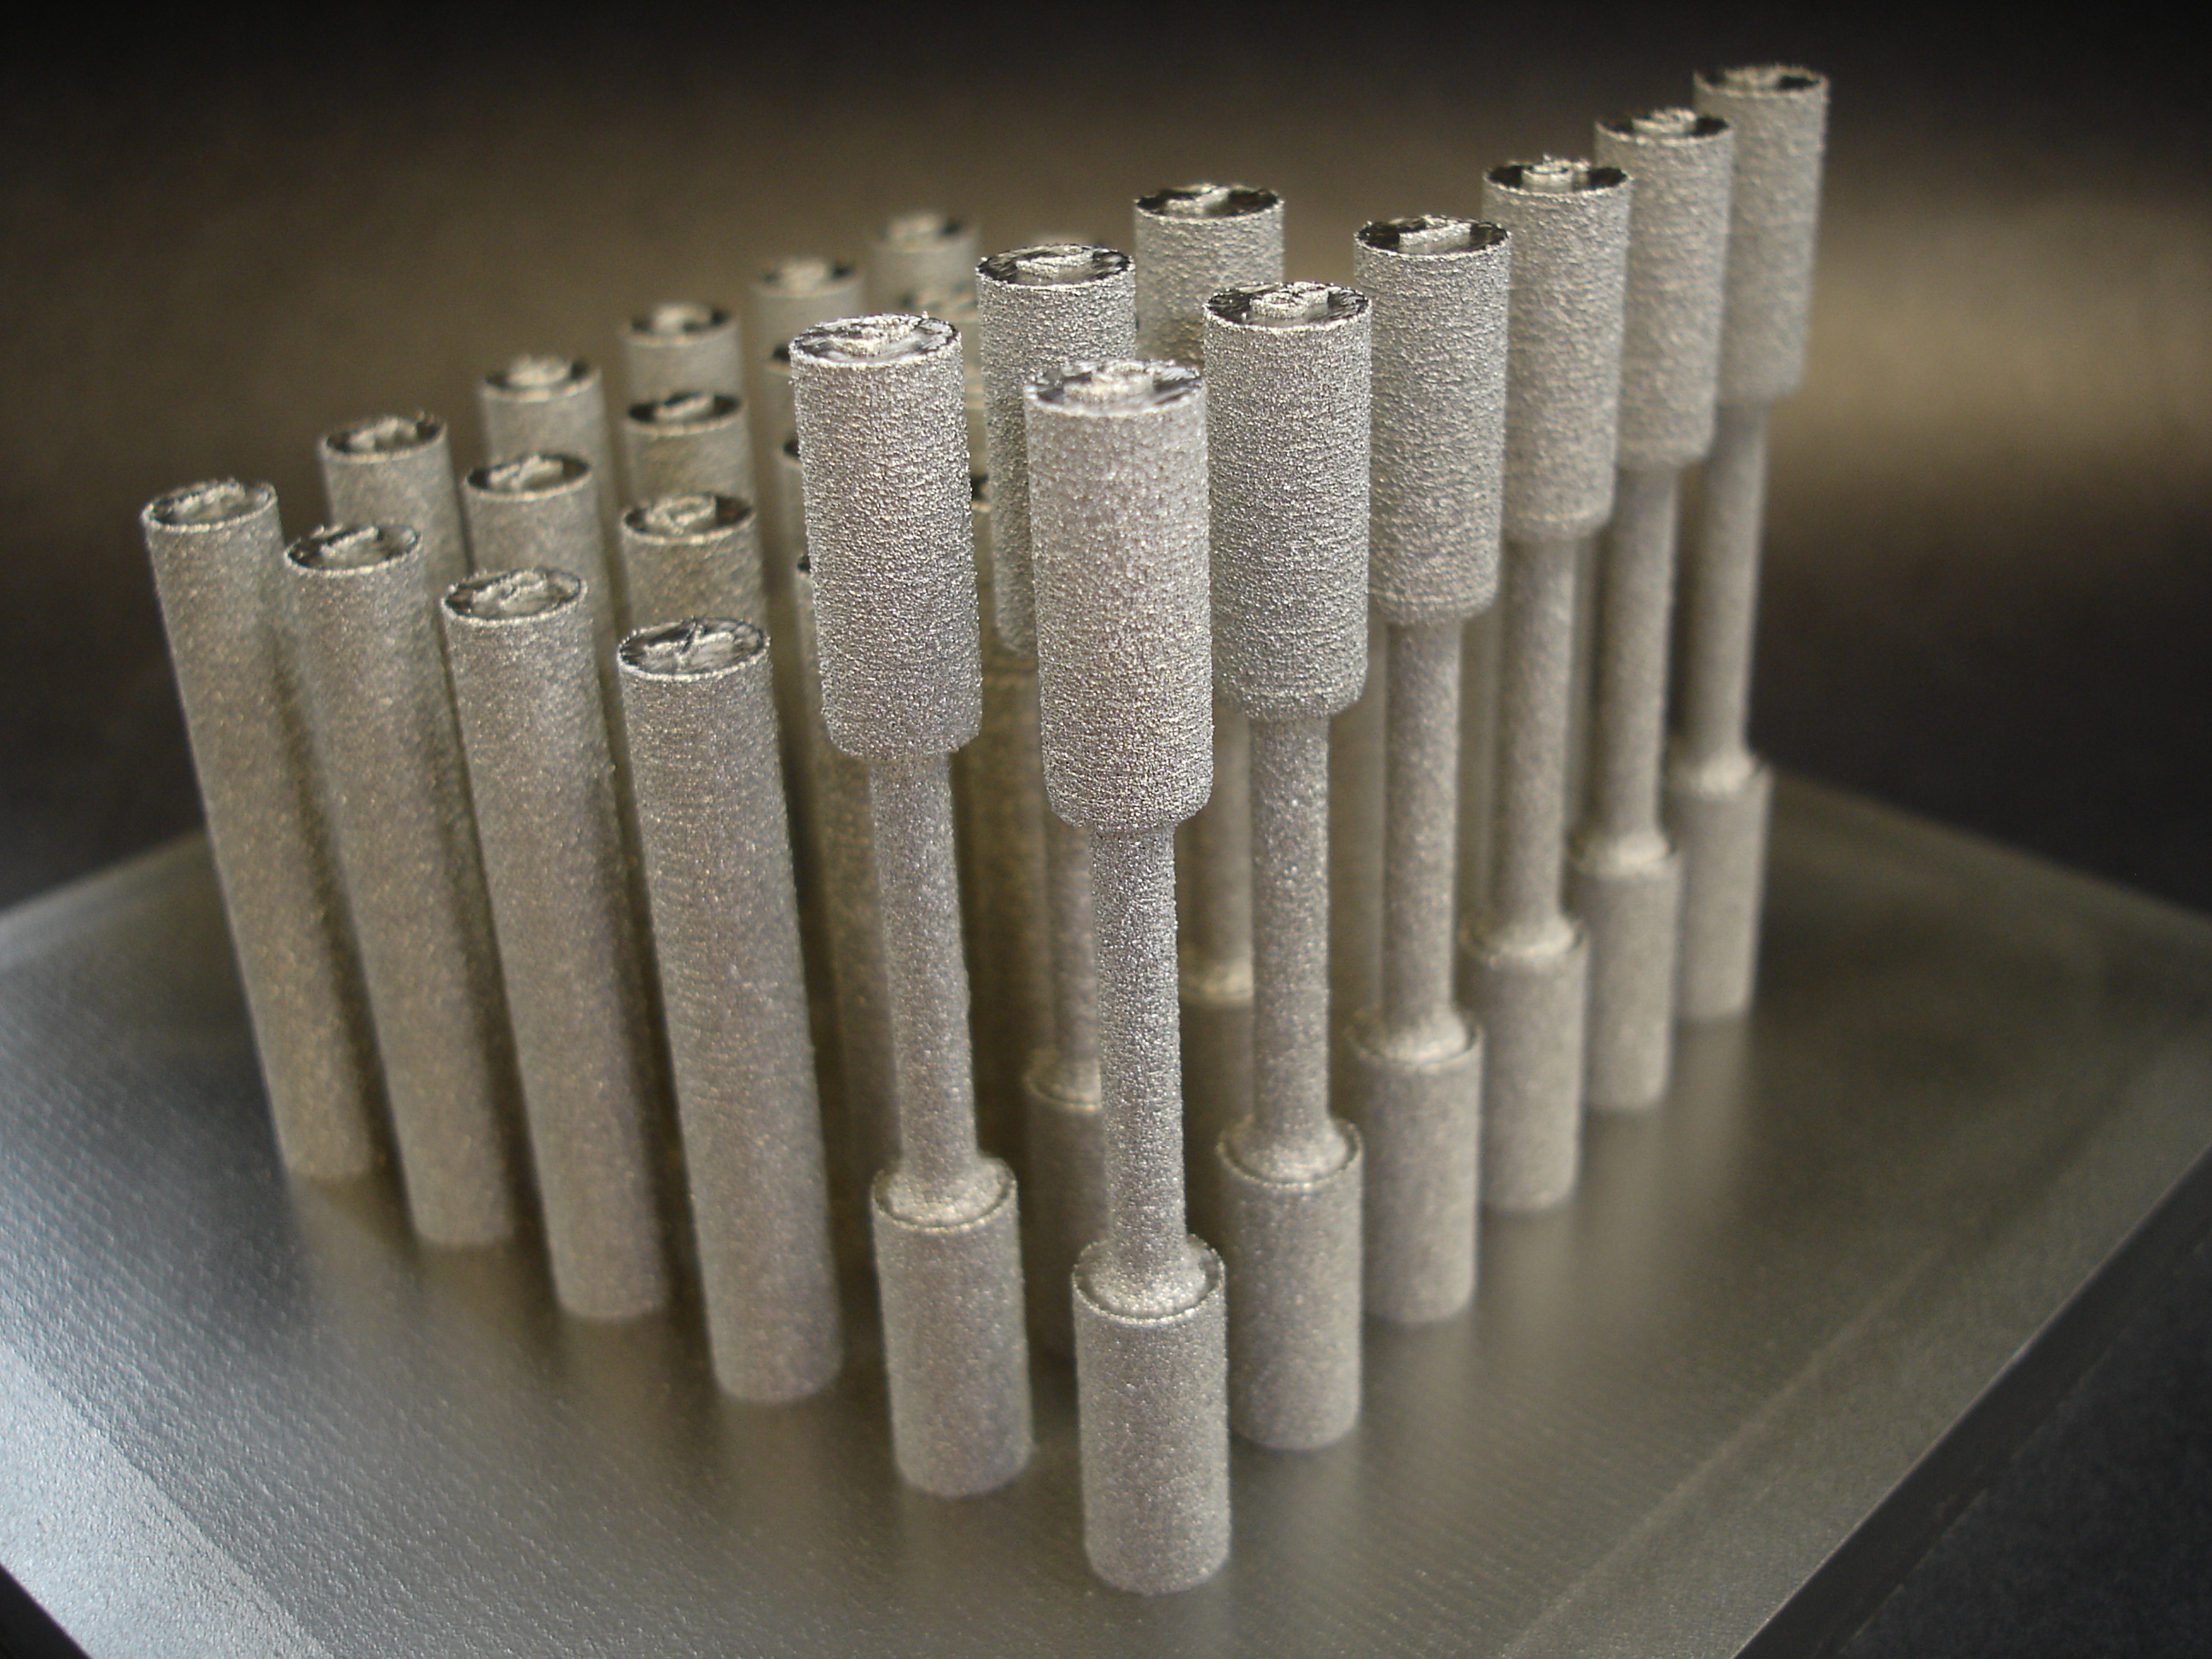 Tensile samples constructed with SEBM made of 316L